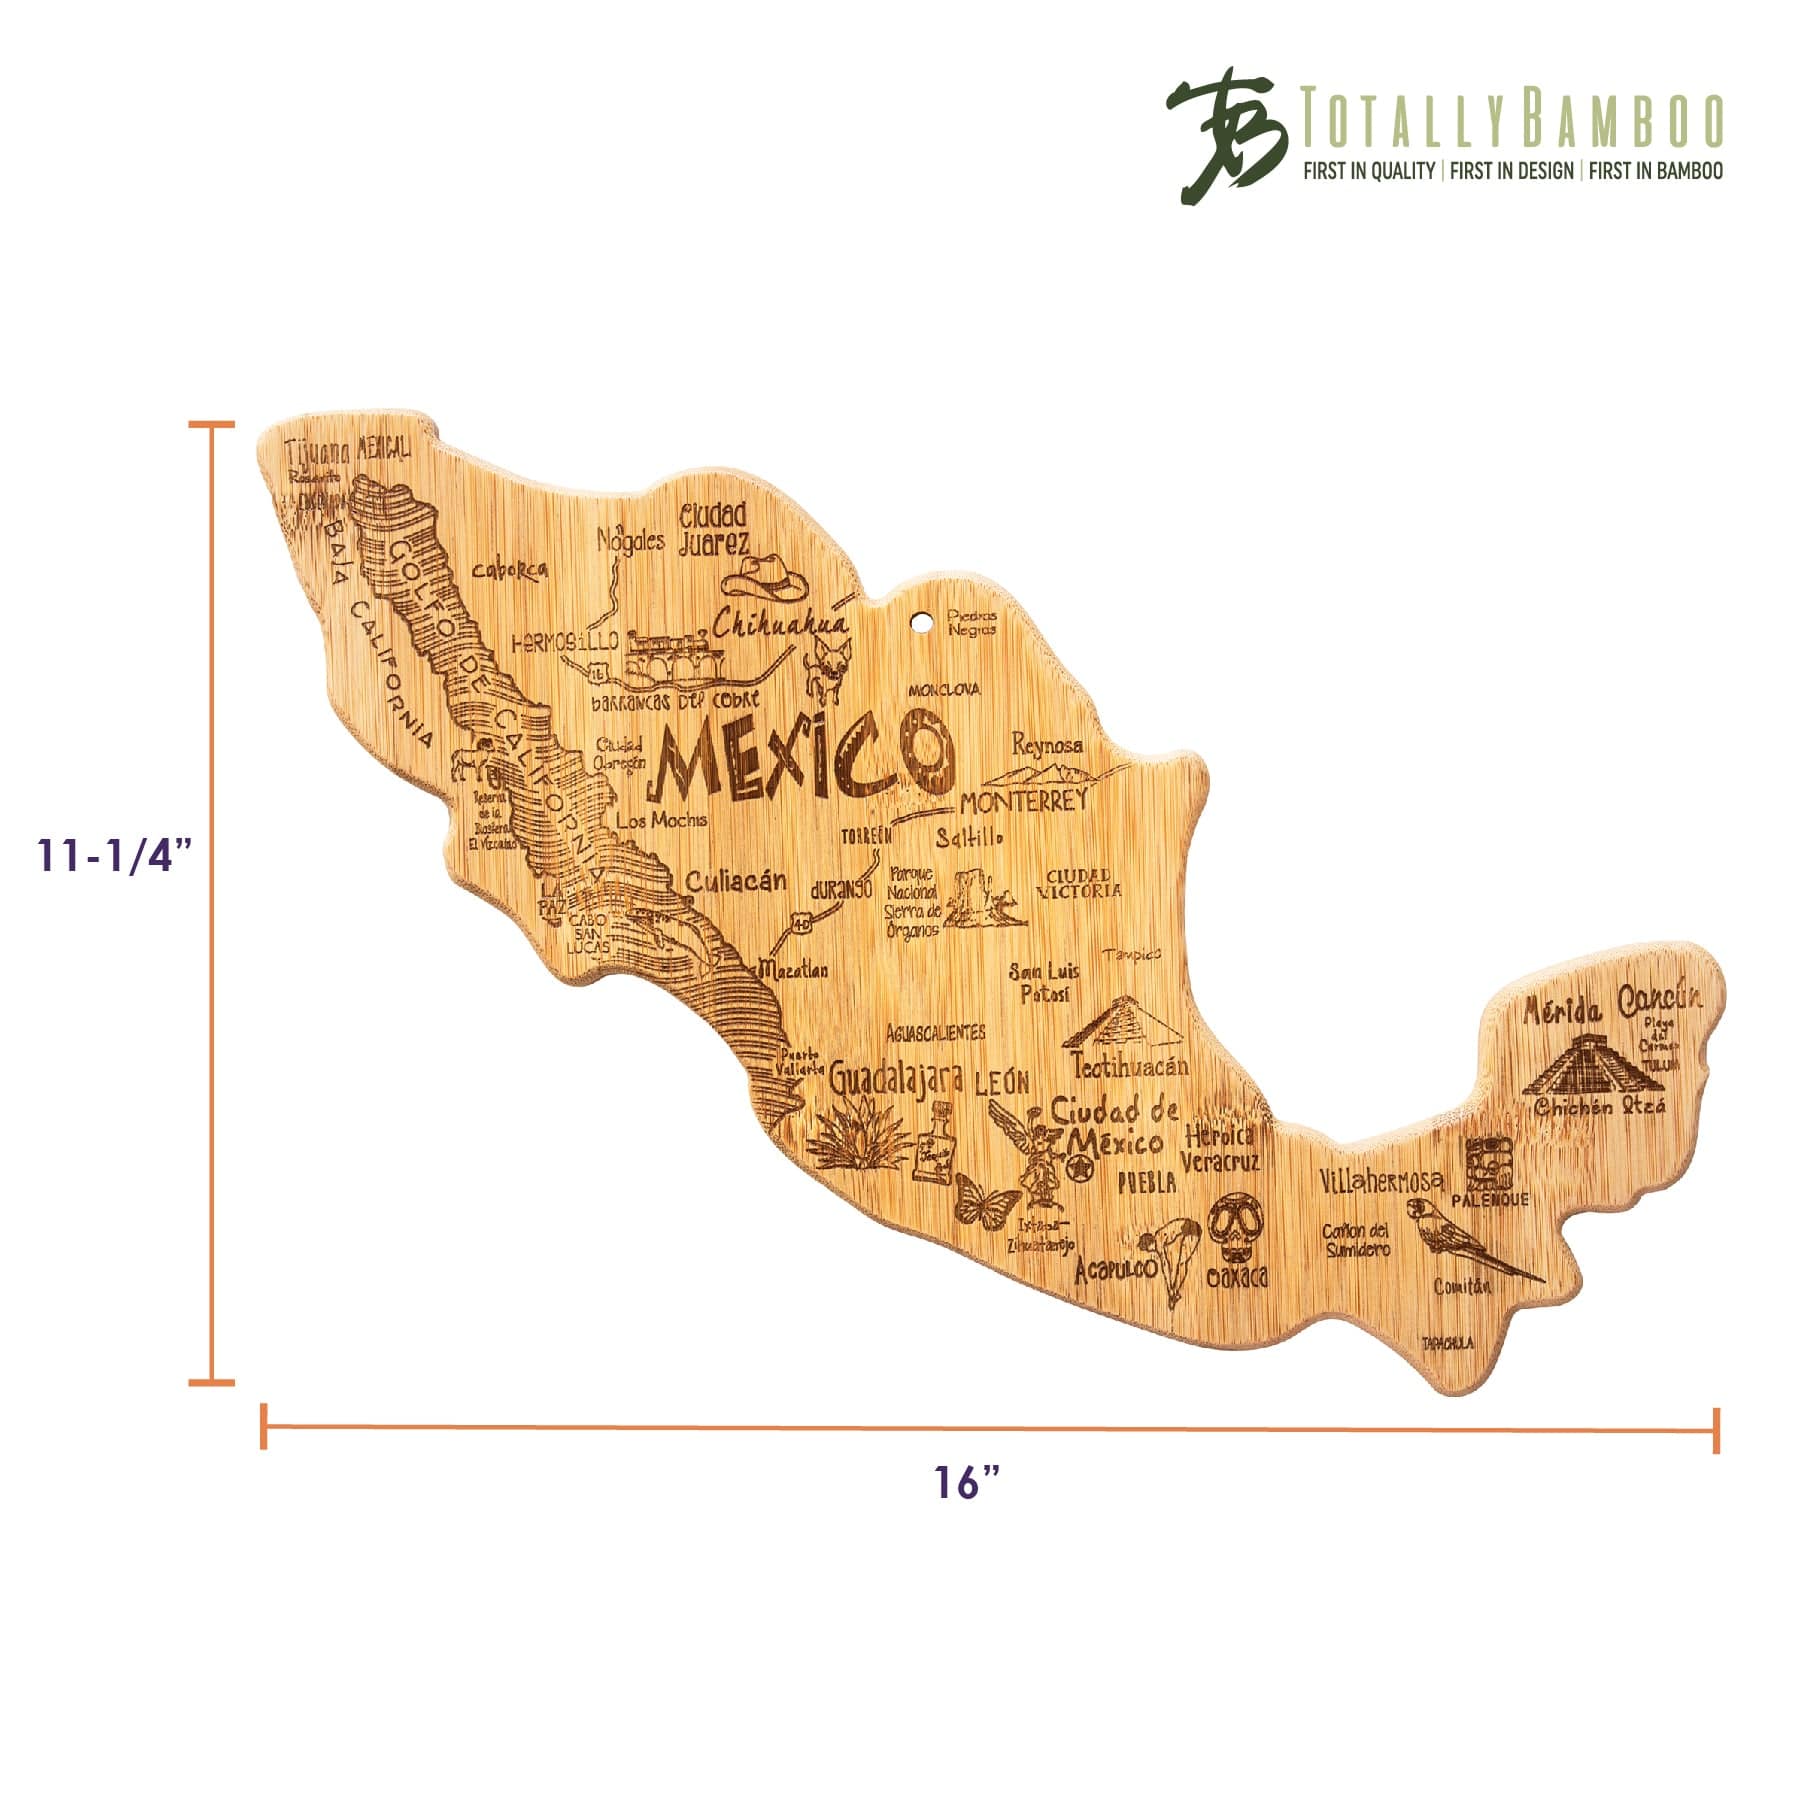 Totally Bamboo Destination Mexico Shaped Bamboo Serving and Cutting Board